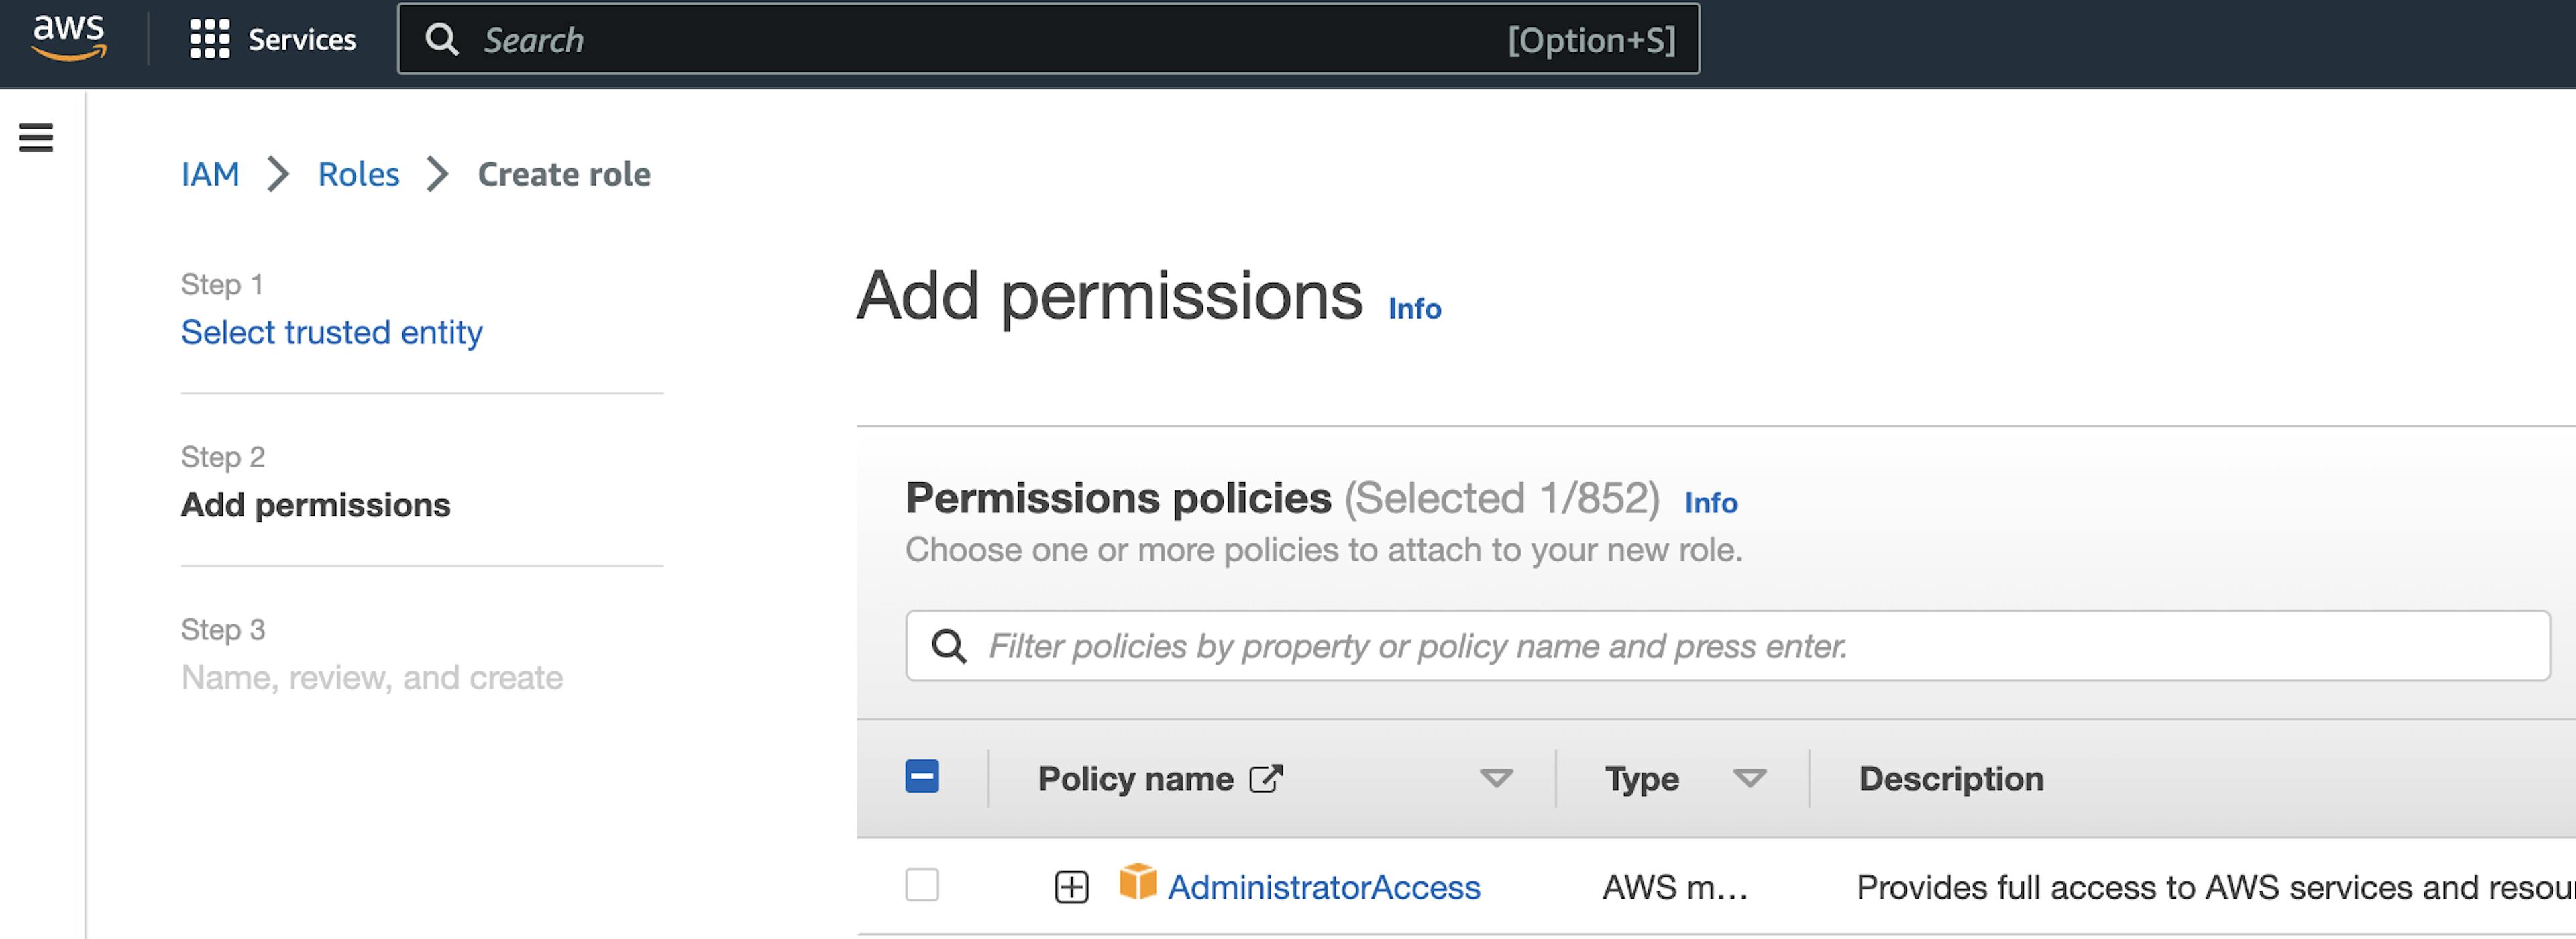 The screenshot of AWS web page with the pointer to AdministratorAccess permission